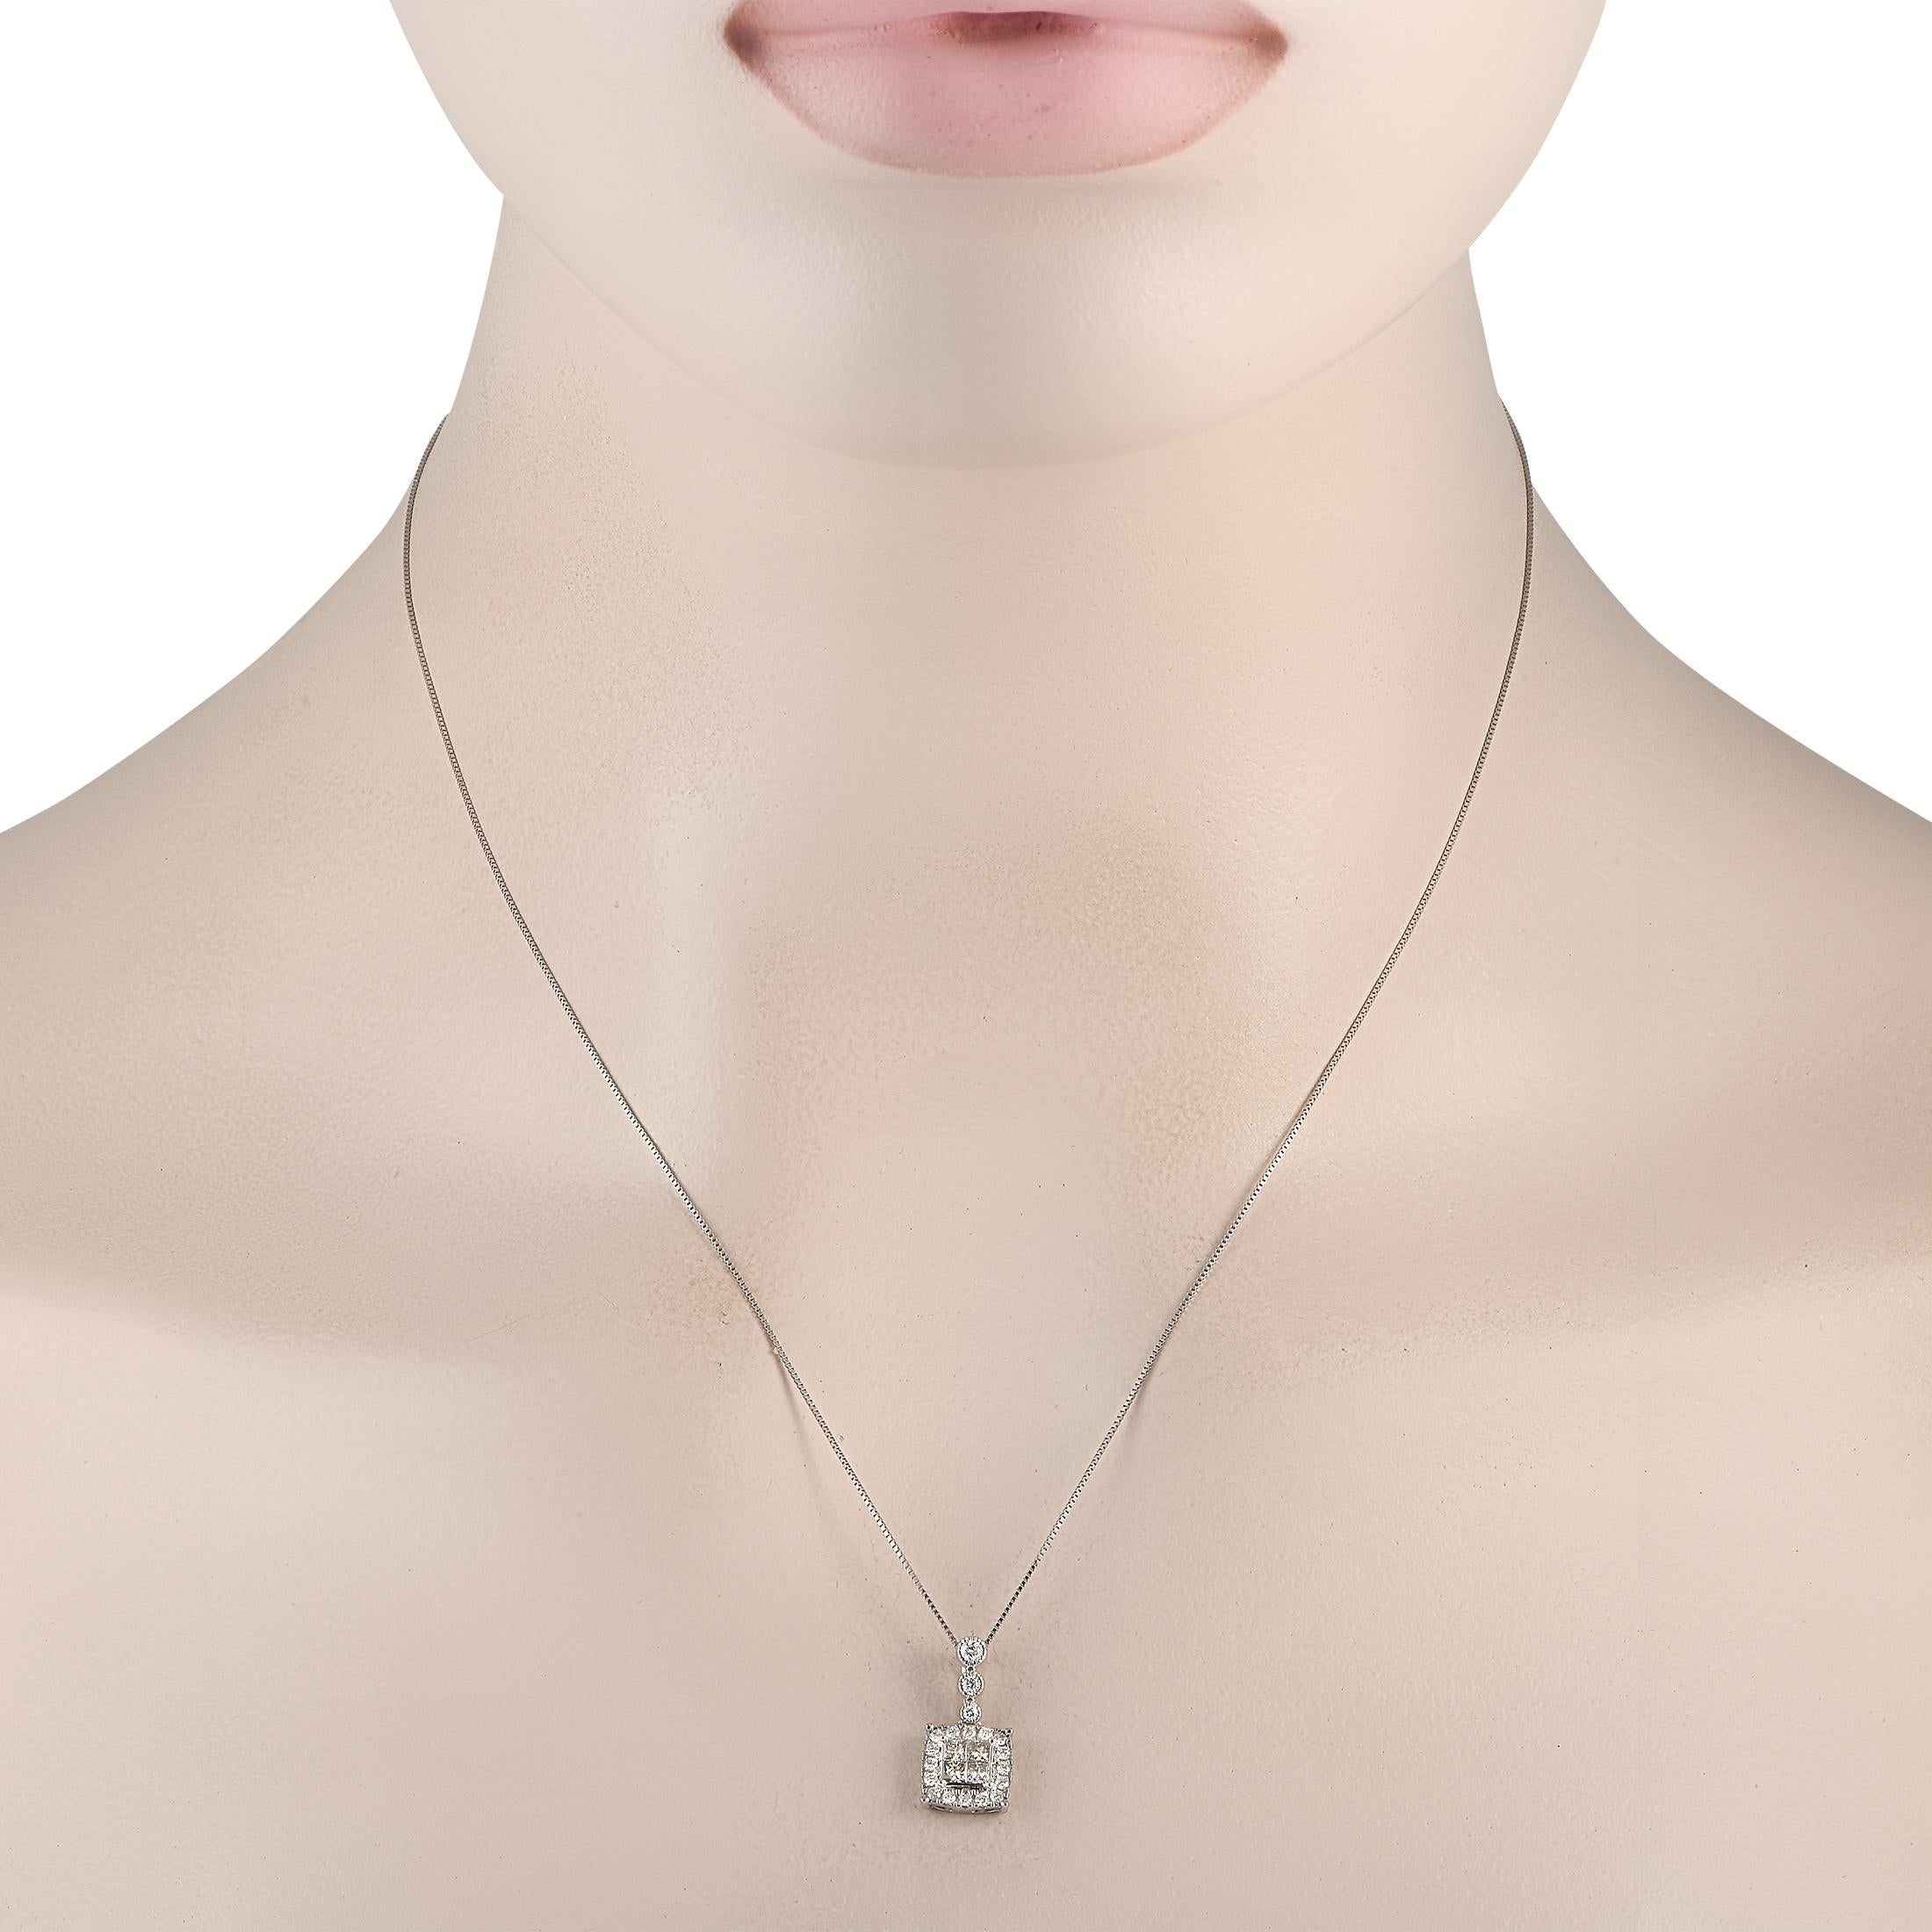 Add this necklace to your daily wardrobe and let it add a subtle sparkle to your look - and your day. The cable chain necklace is fashioned from 14K white gold and has a spring ring clasp. It holds a square-shaped diamond cluster pendant held by a